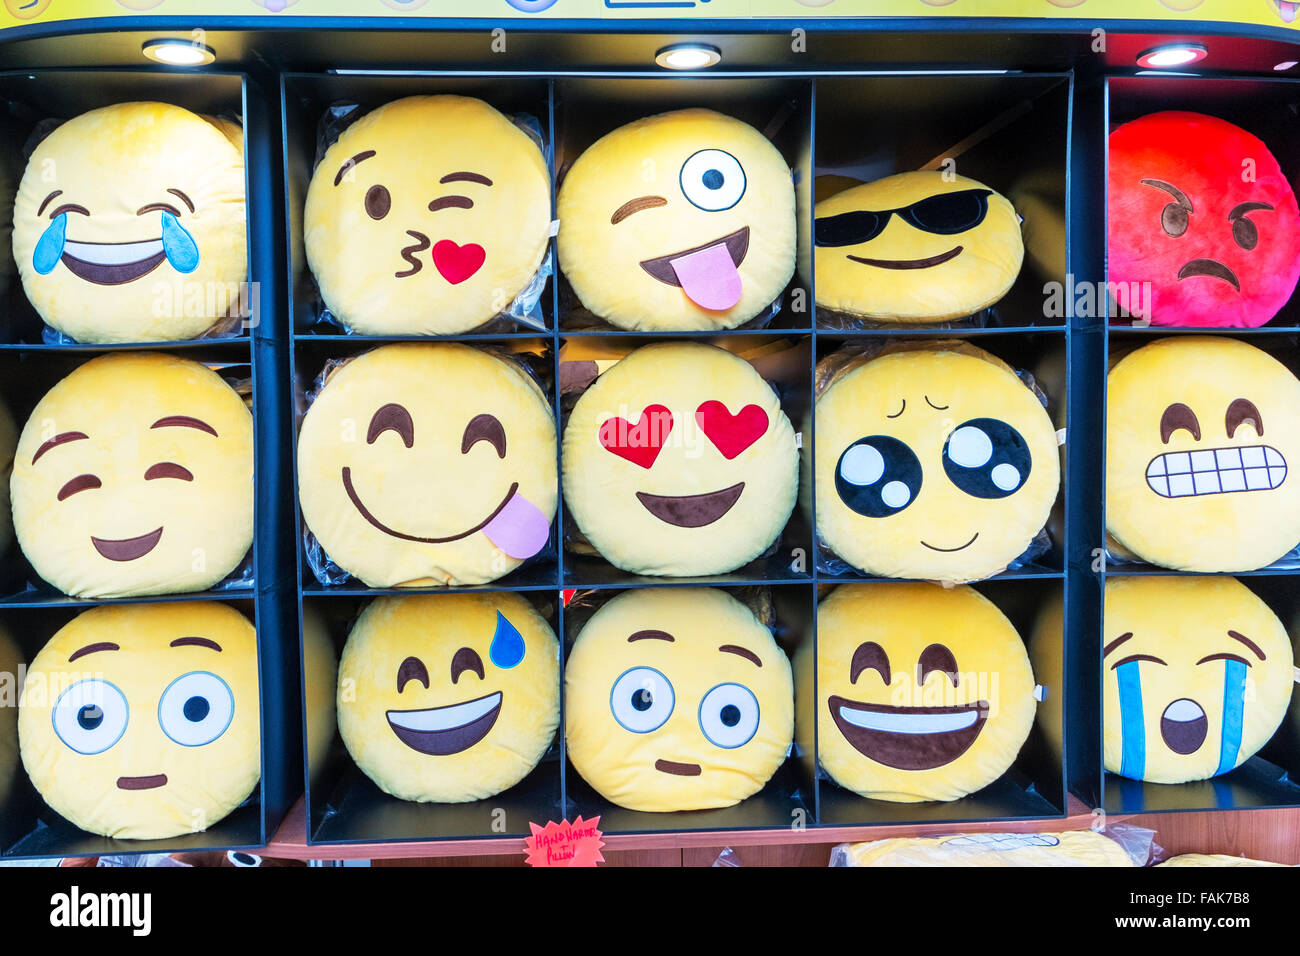 Emoji Emojis emoticon teen language smilies happy sad cheeky angry face faces phone gestures text texting shorthand emoticons Stock Photo